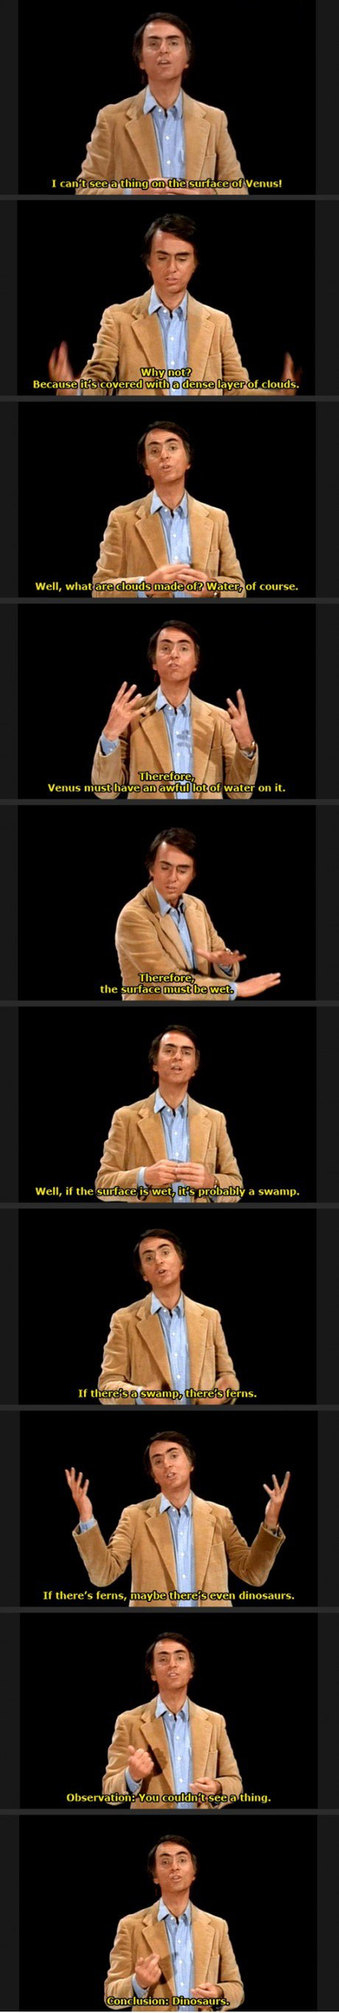 Carl Sagan pointing out the detriment of drawing conclusions believing something without facts - meme